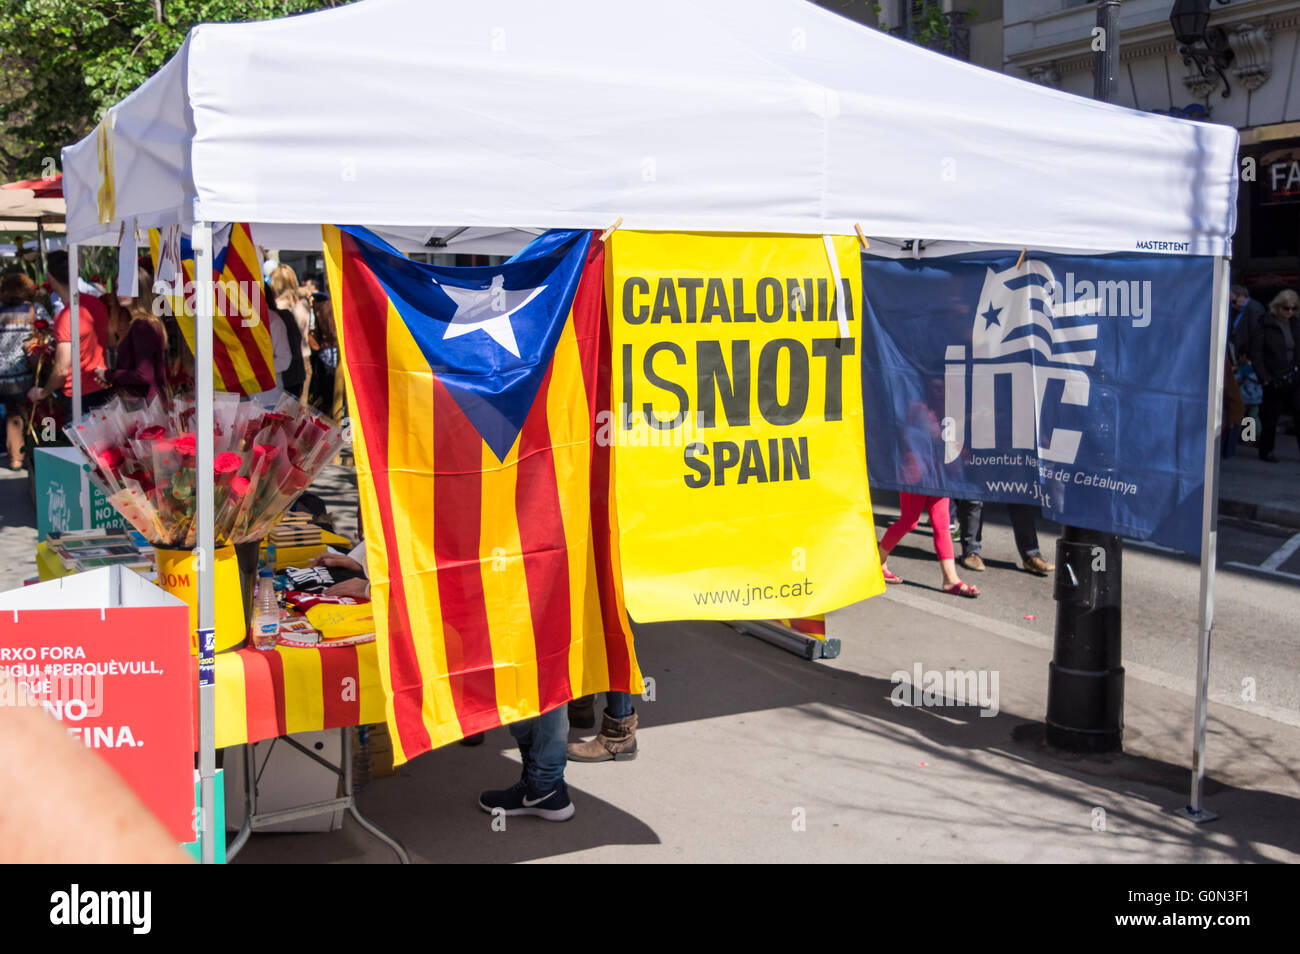 'Catalonia is not Spain' banner at a booth of JNC, a party supporting Catalan independence from Spain. Barcelona, 23 April 2016. Stock Photo